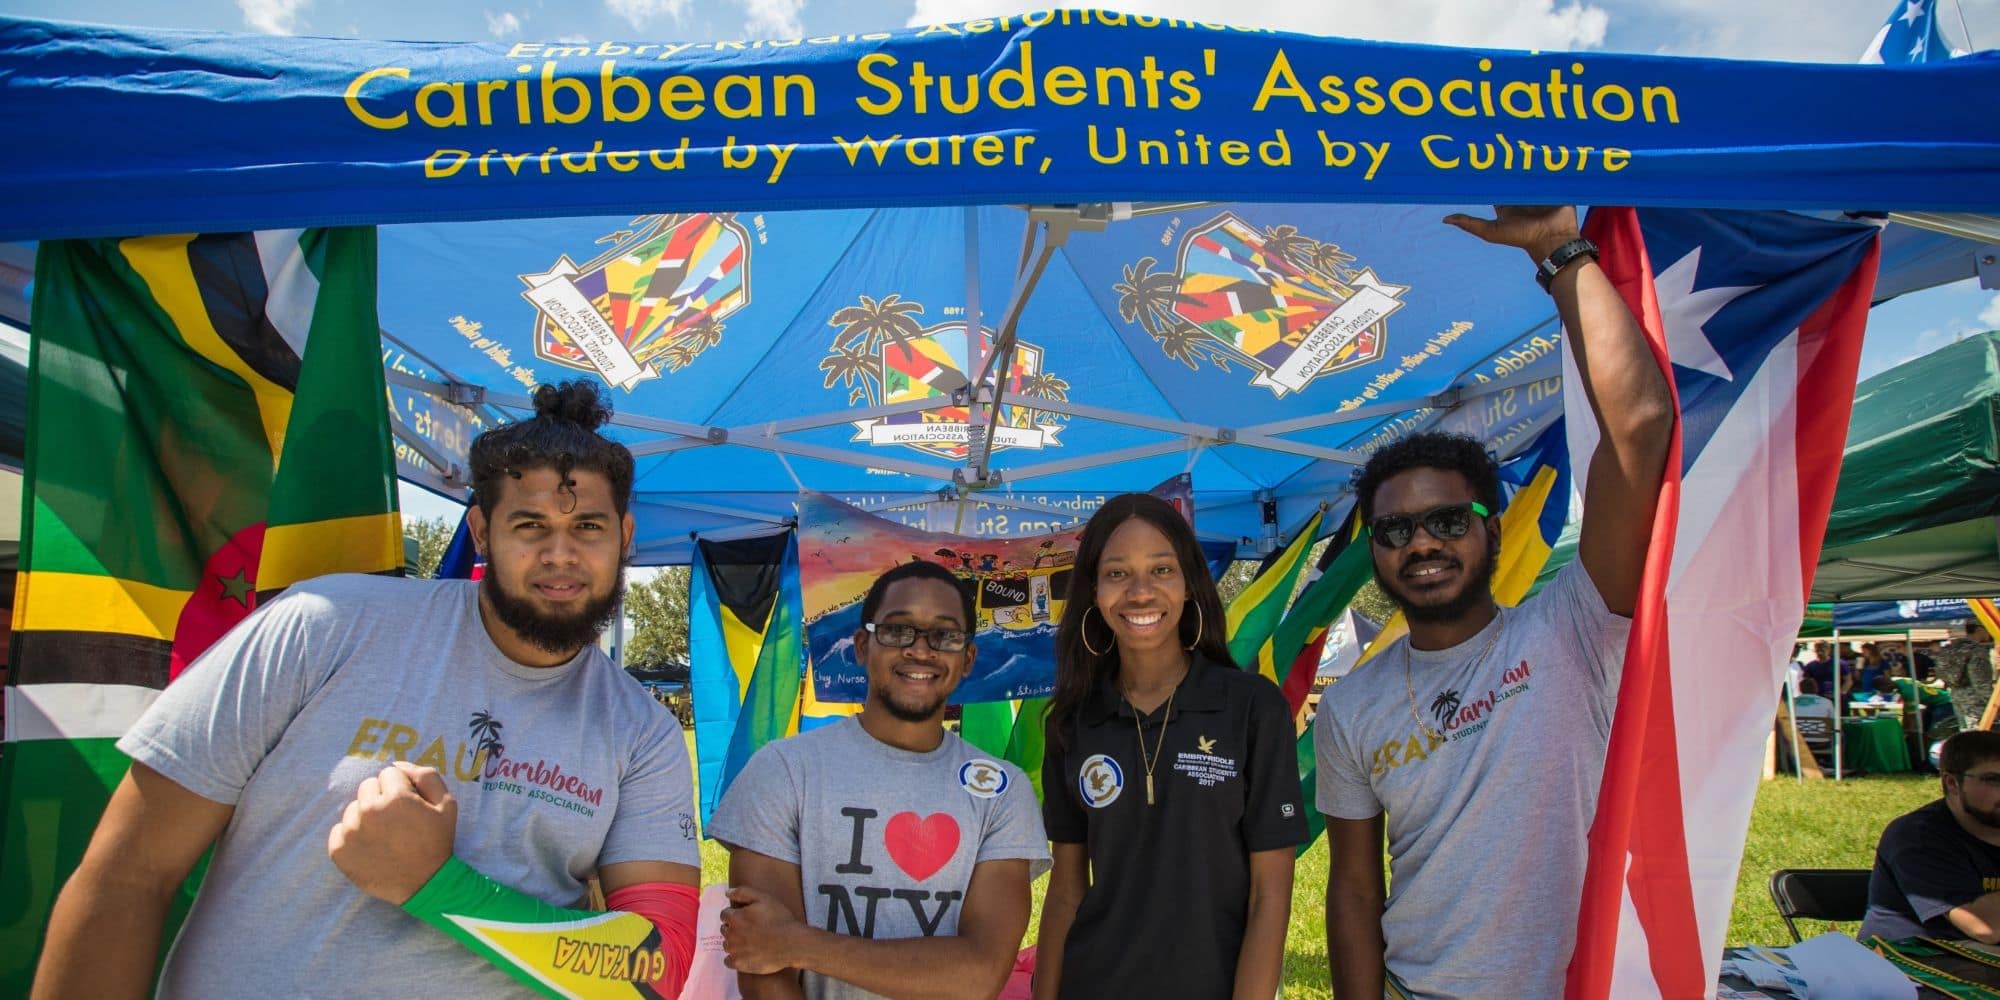 Students from the Caribbean Students’ Association pose during the Activities Fair on the Daytona Beach Campus. (Embry-Riddle / David Massey)